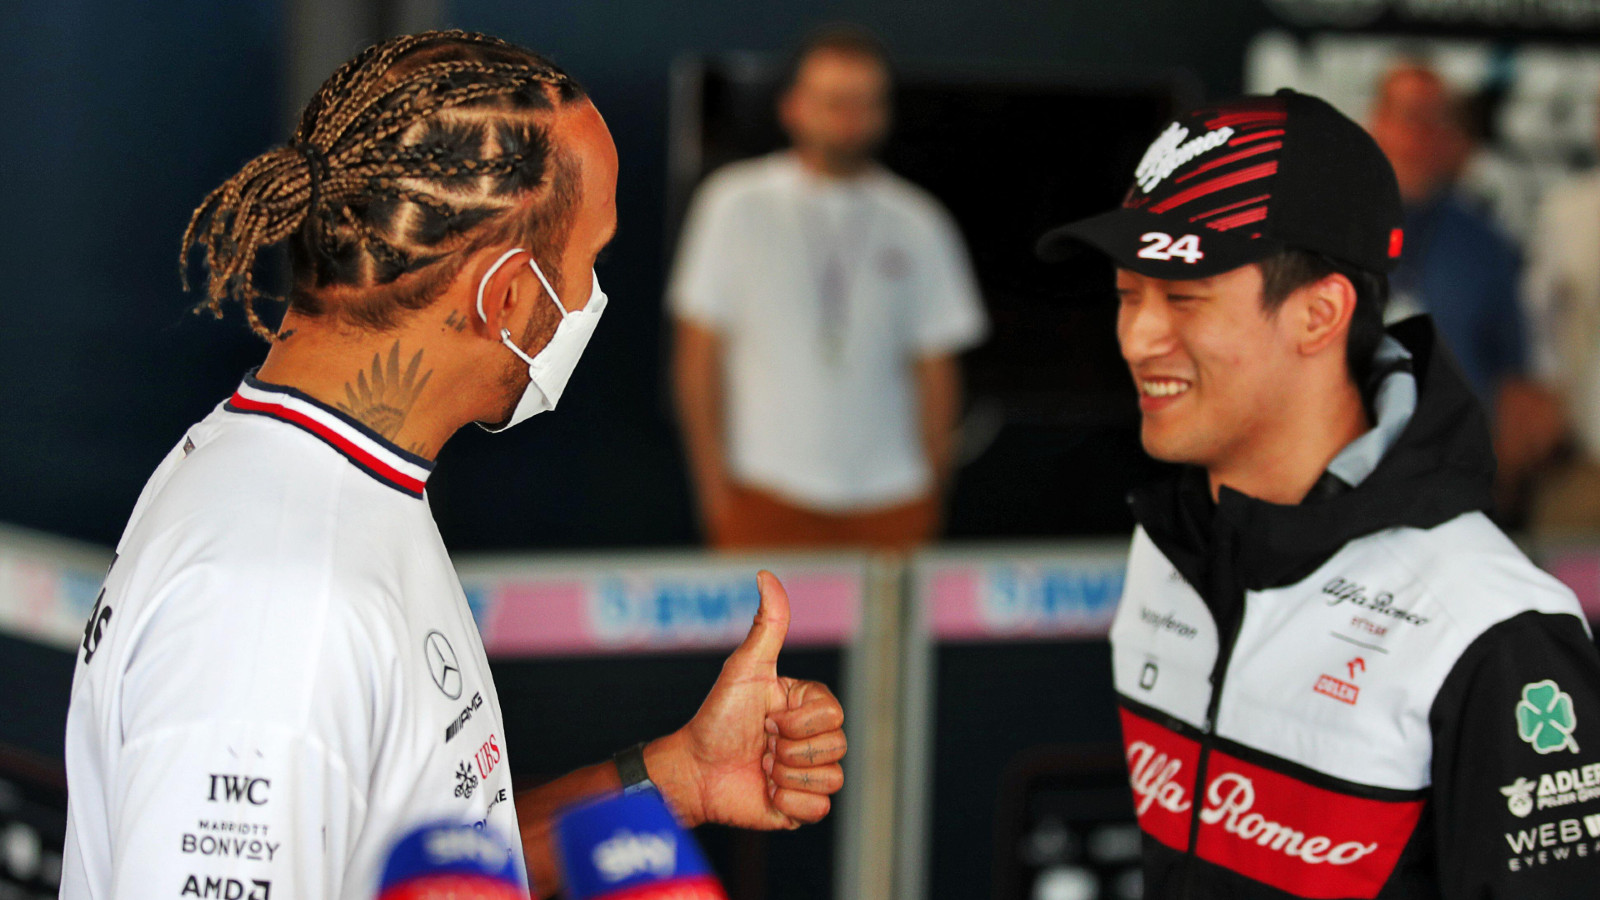 Alfa Romeo's Zhou Guanyu chats with Mercedes' Lewis Hamilton at the Austrian Grand Prix. Red Bull Ring, July 2022.